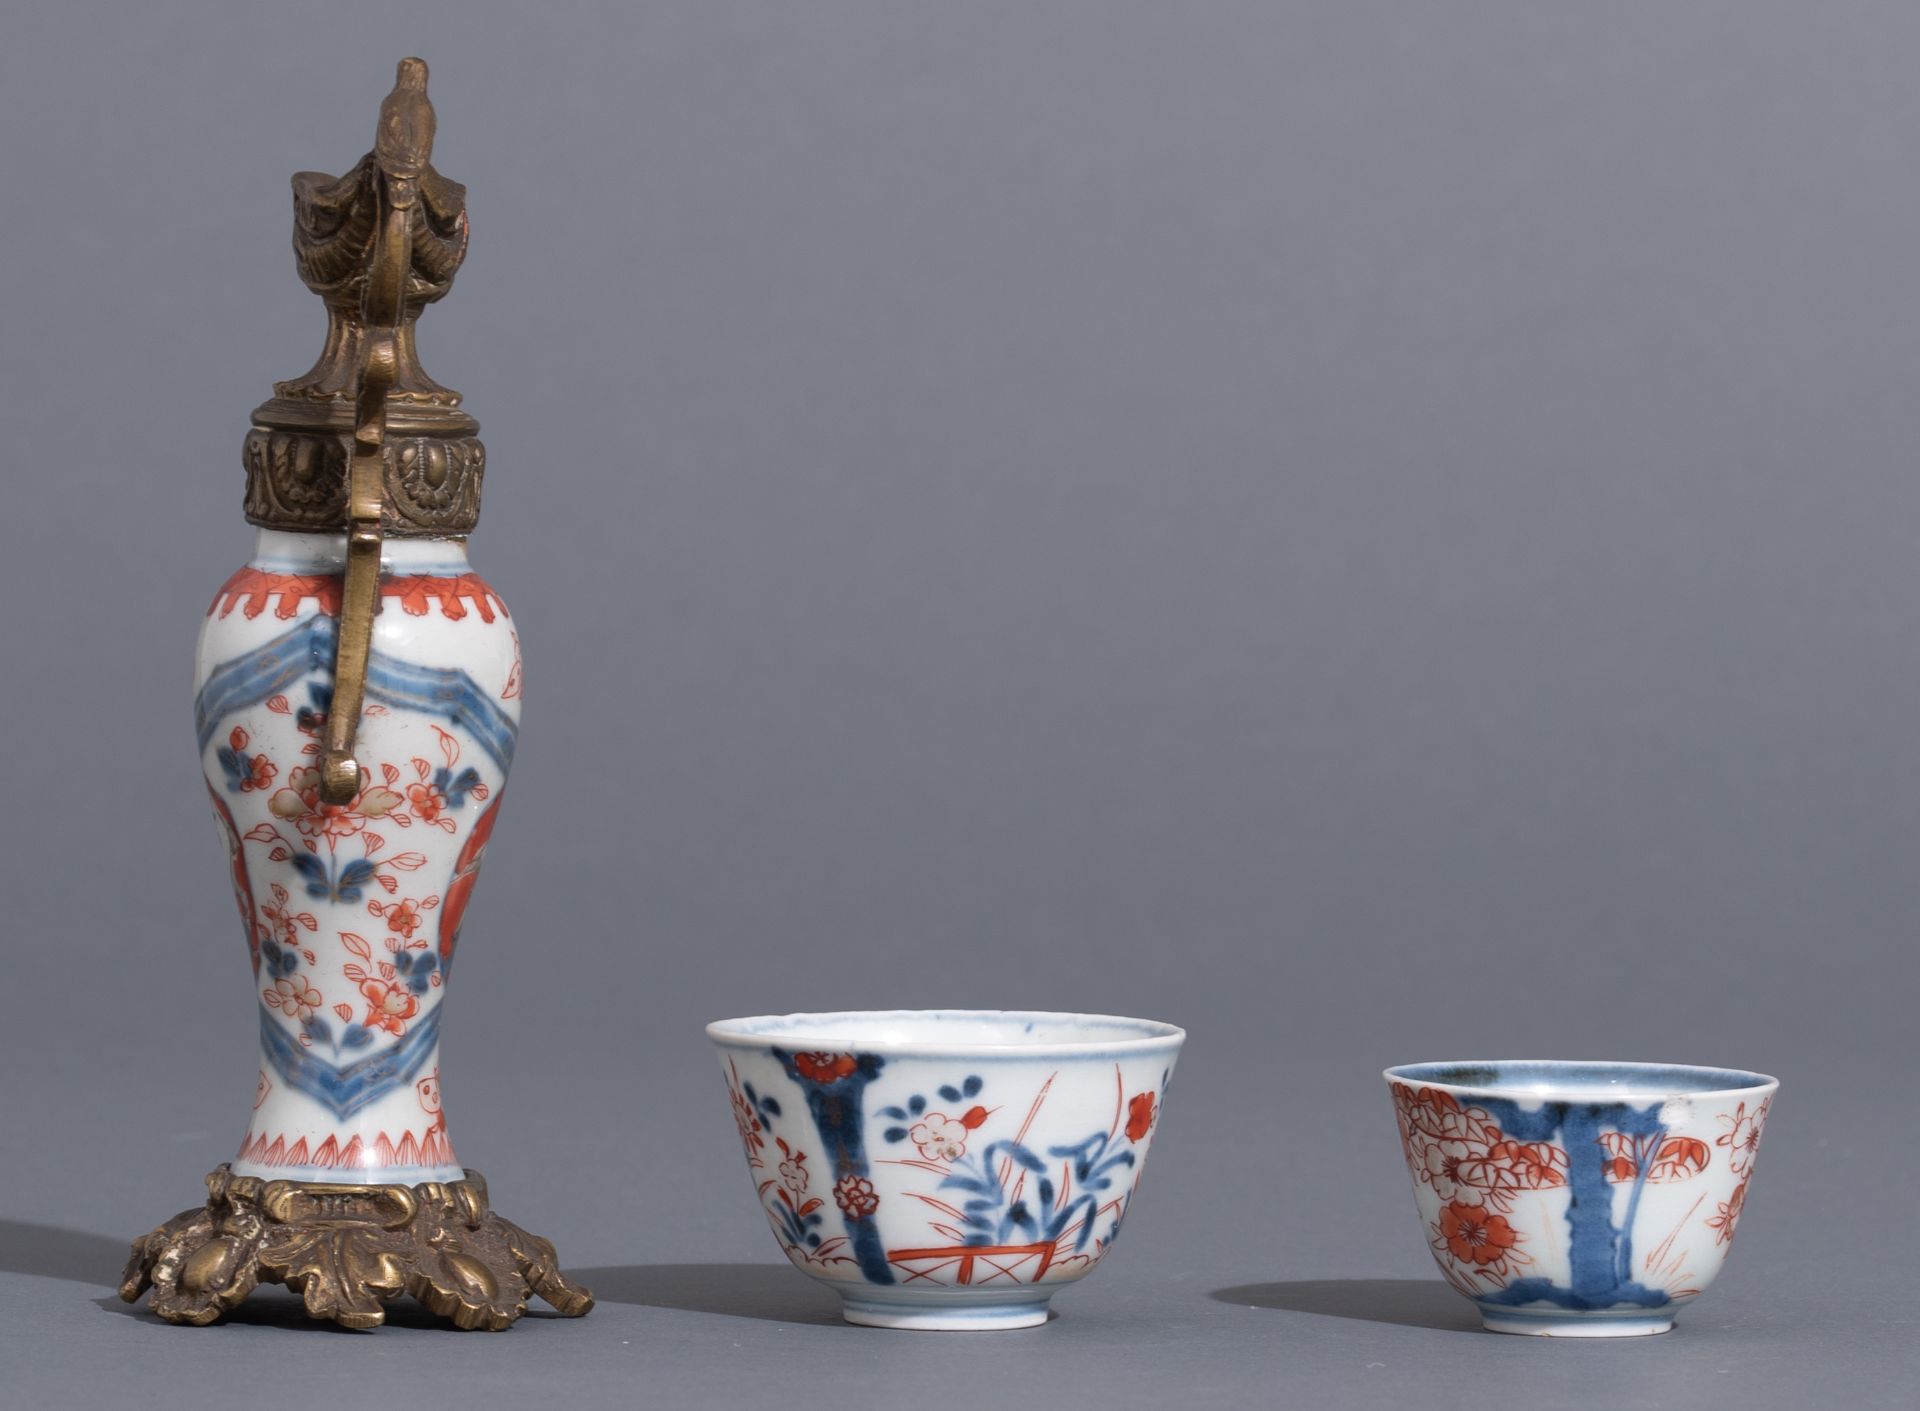 A collection of Chinese and Japanese porcelain items, 18th / 19th / 20thC, H 4 - 47 - ø 10,5 - 23 cm - Image 9 of 19